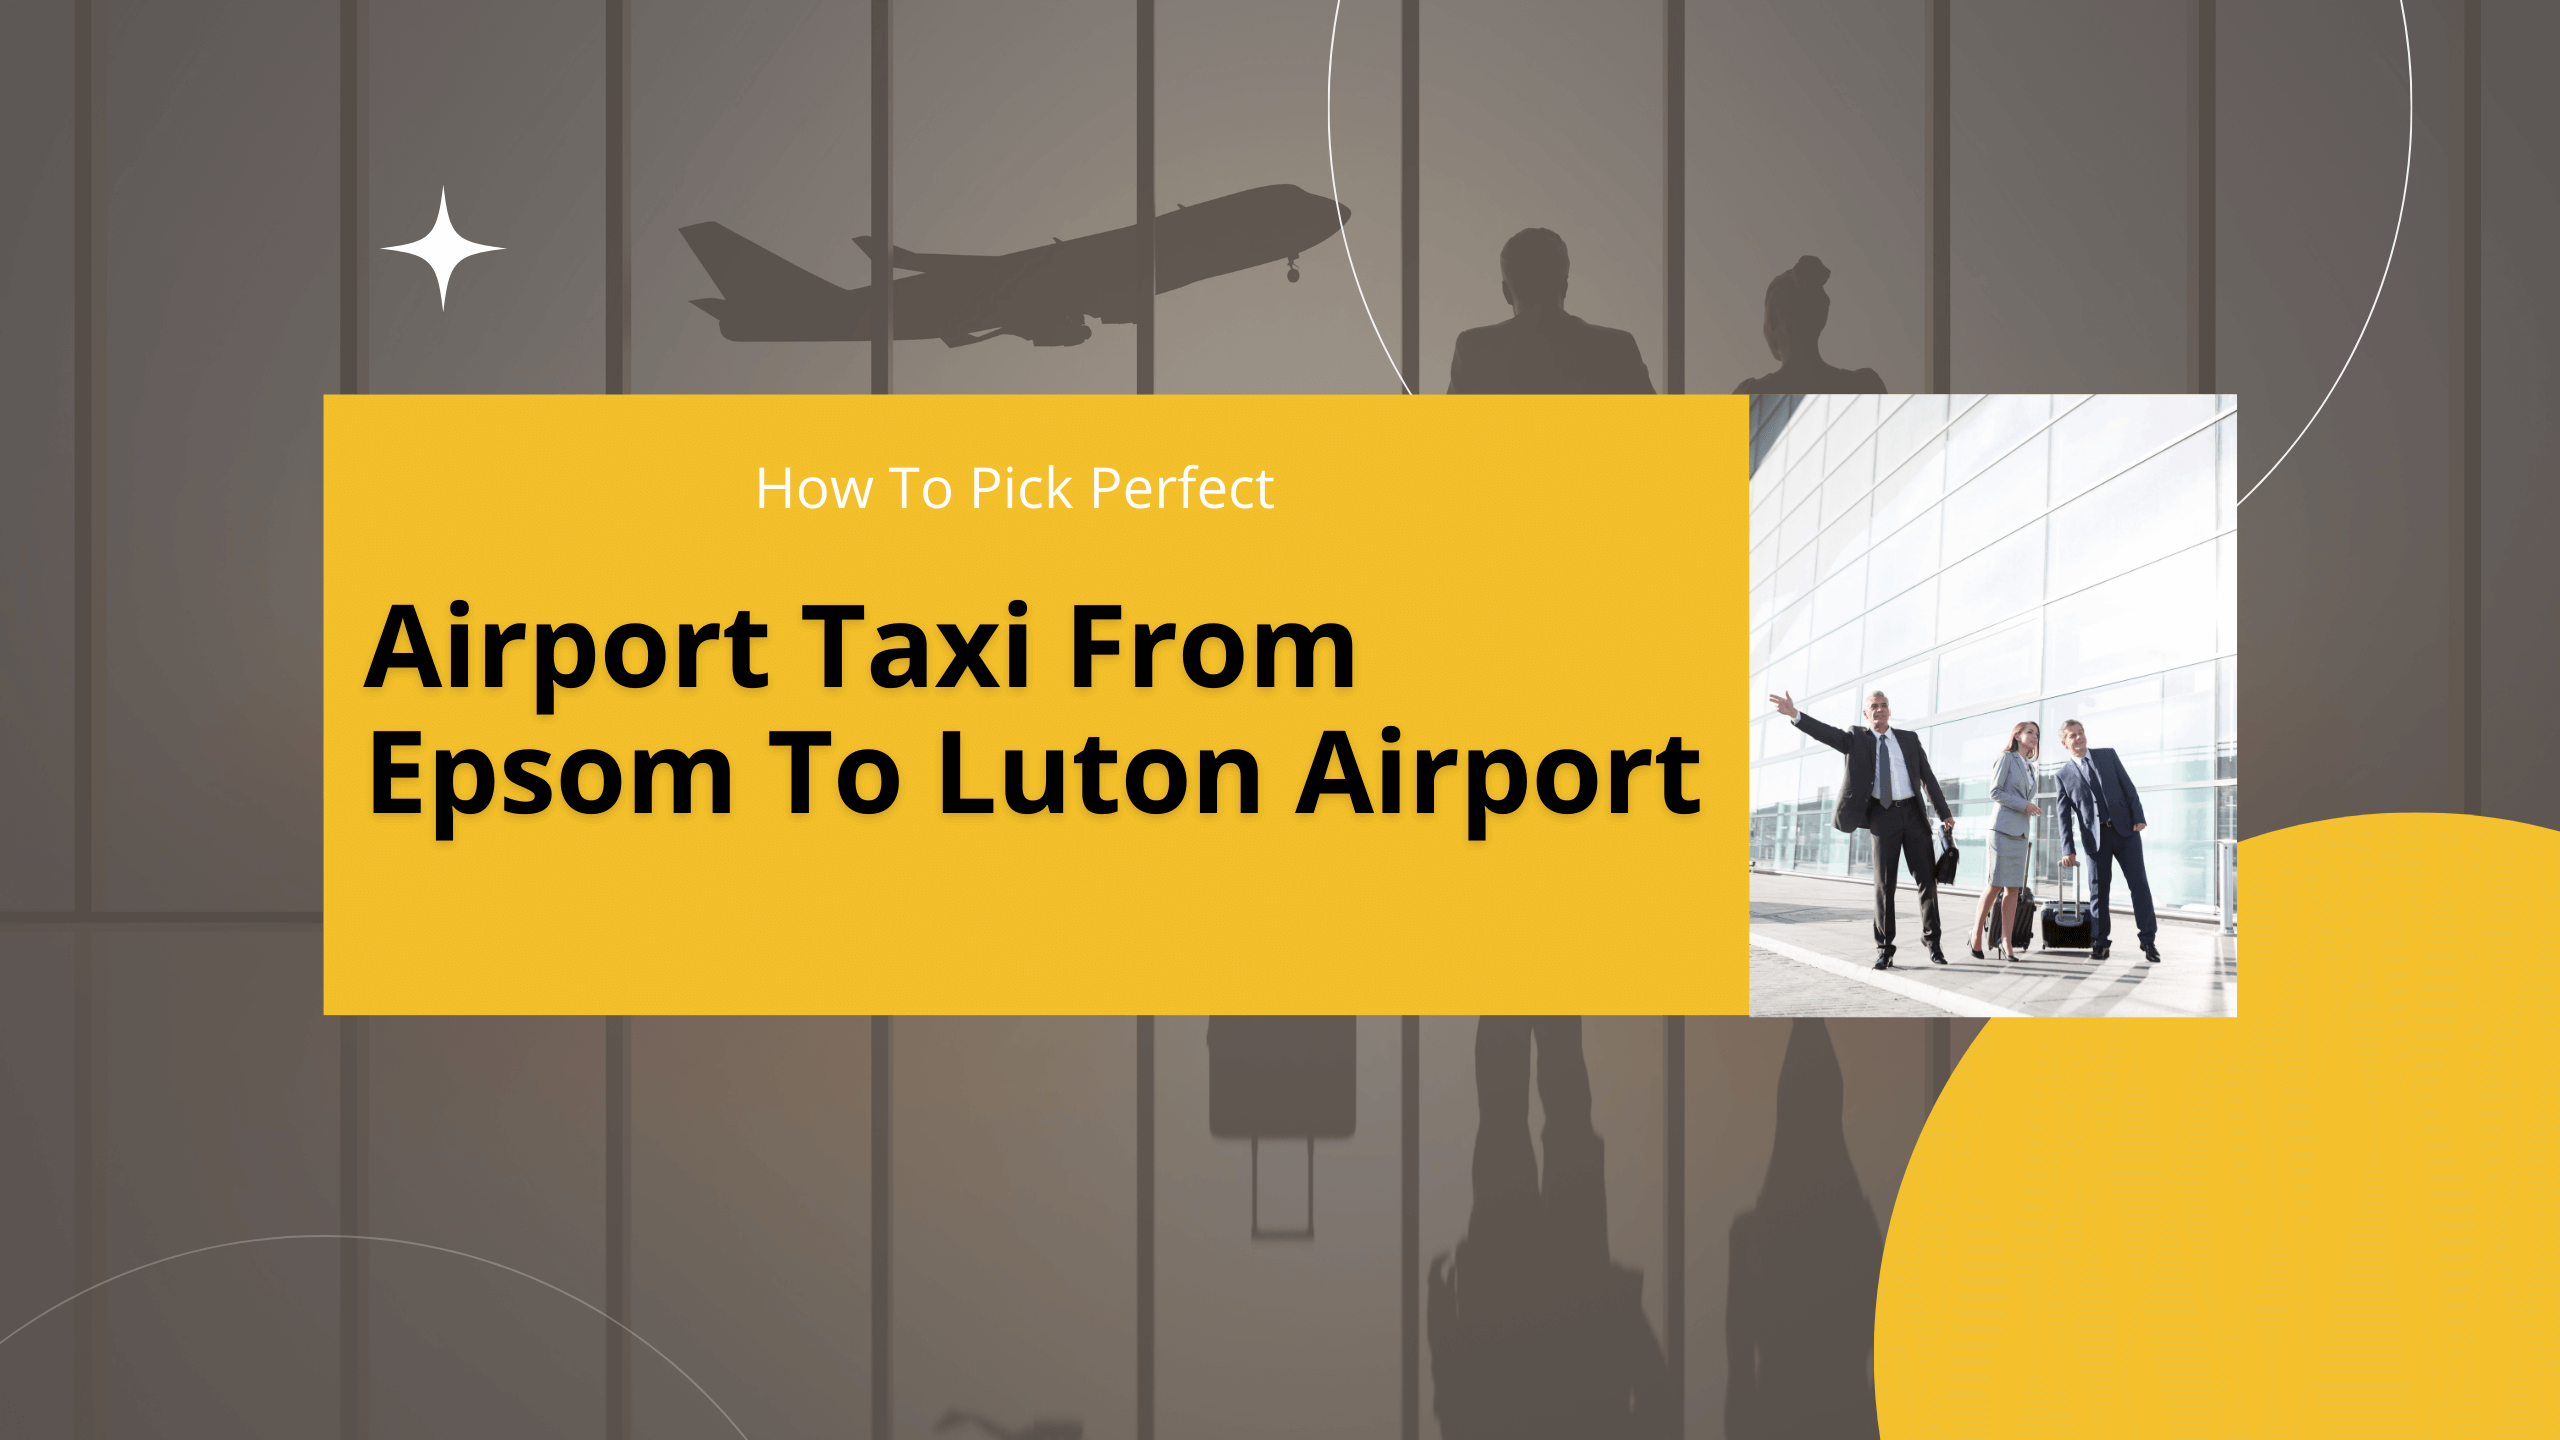 Pick Perfect Airport Taxi From Epsom To Luton Airport